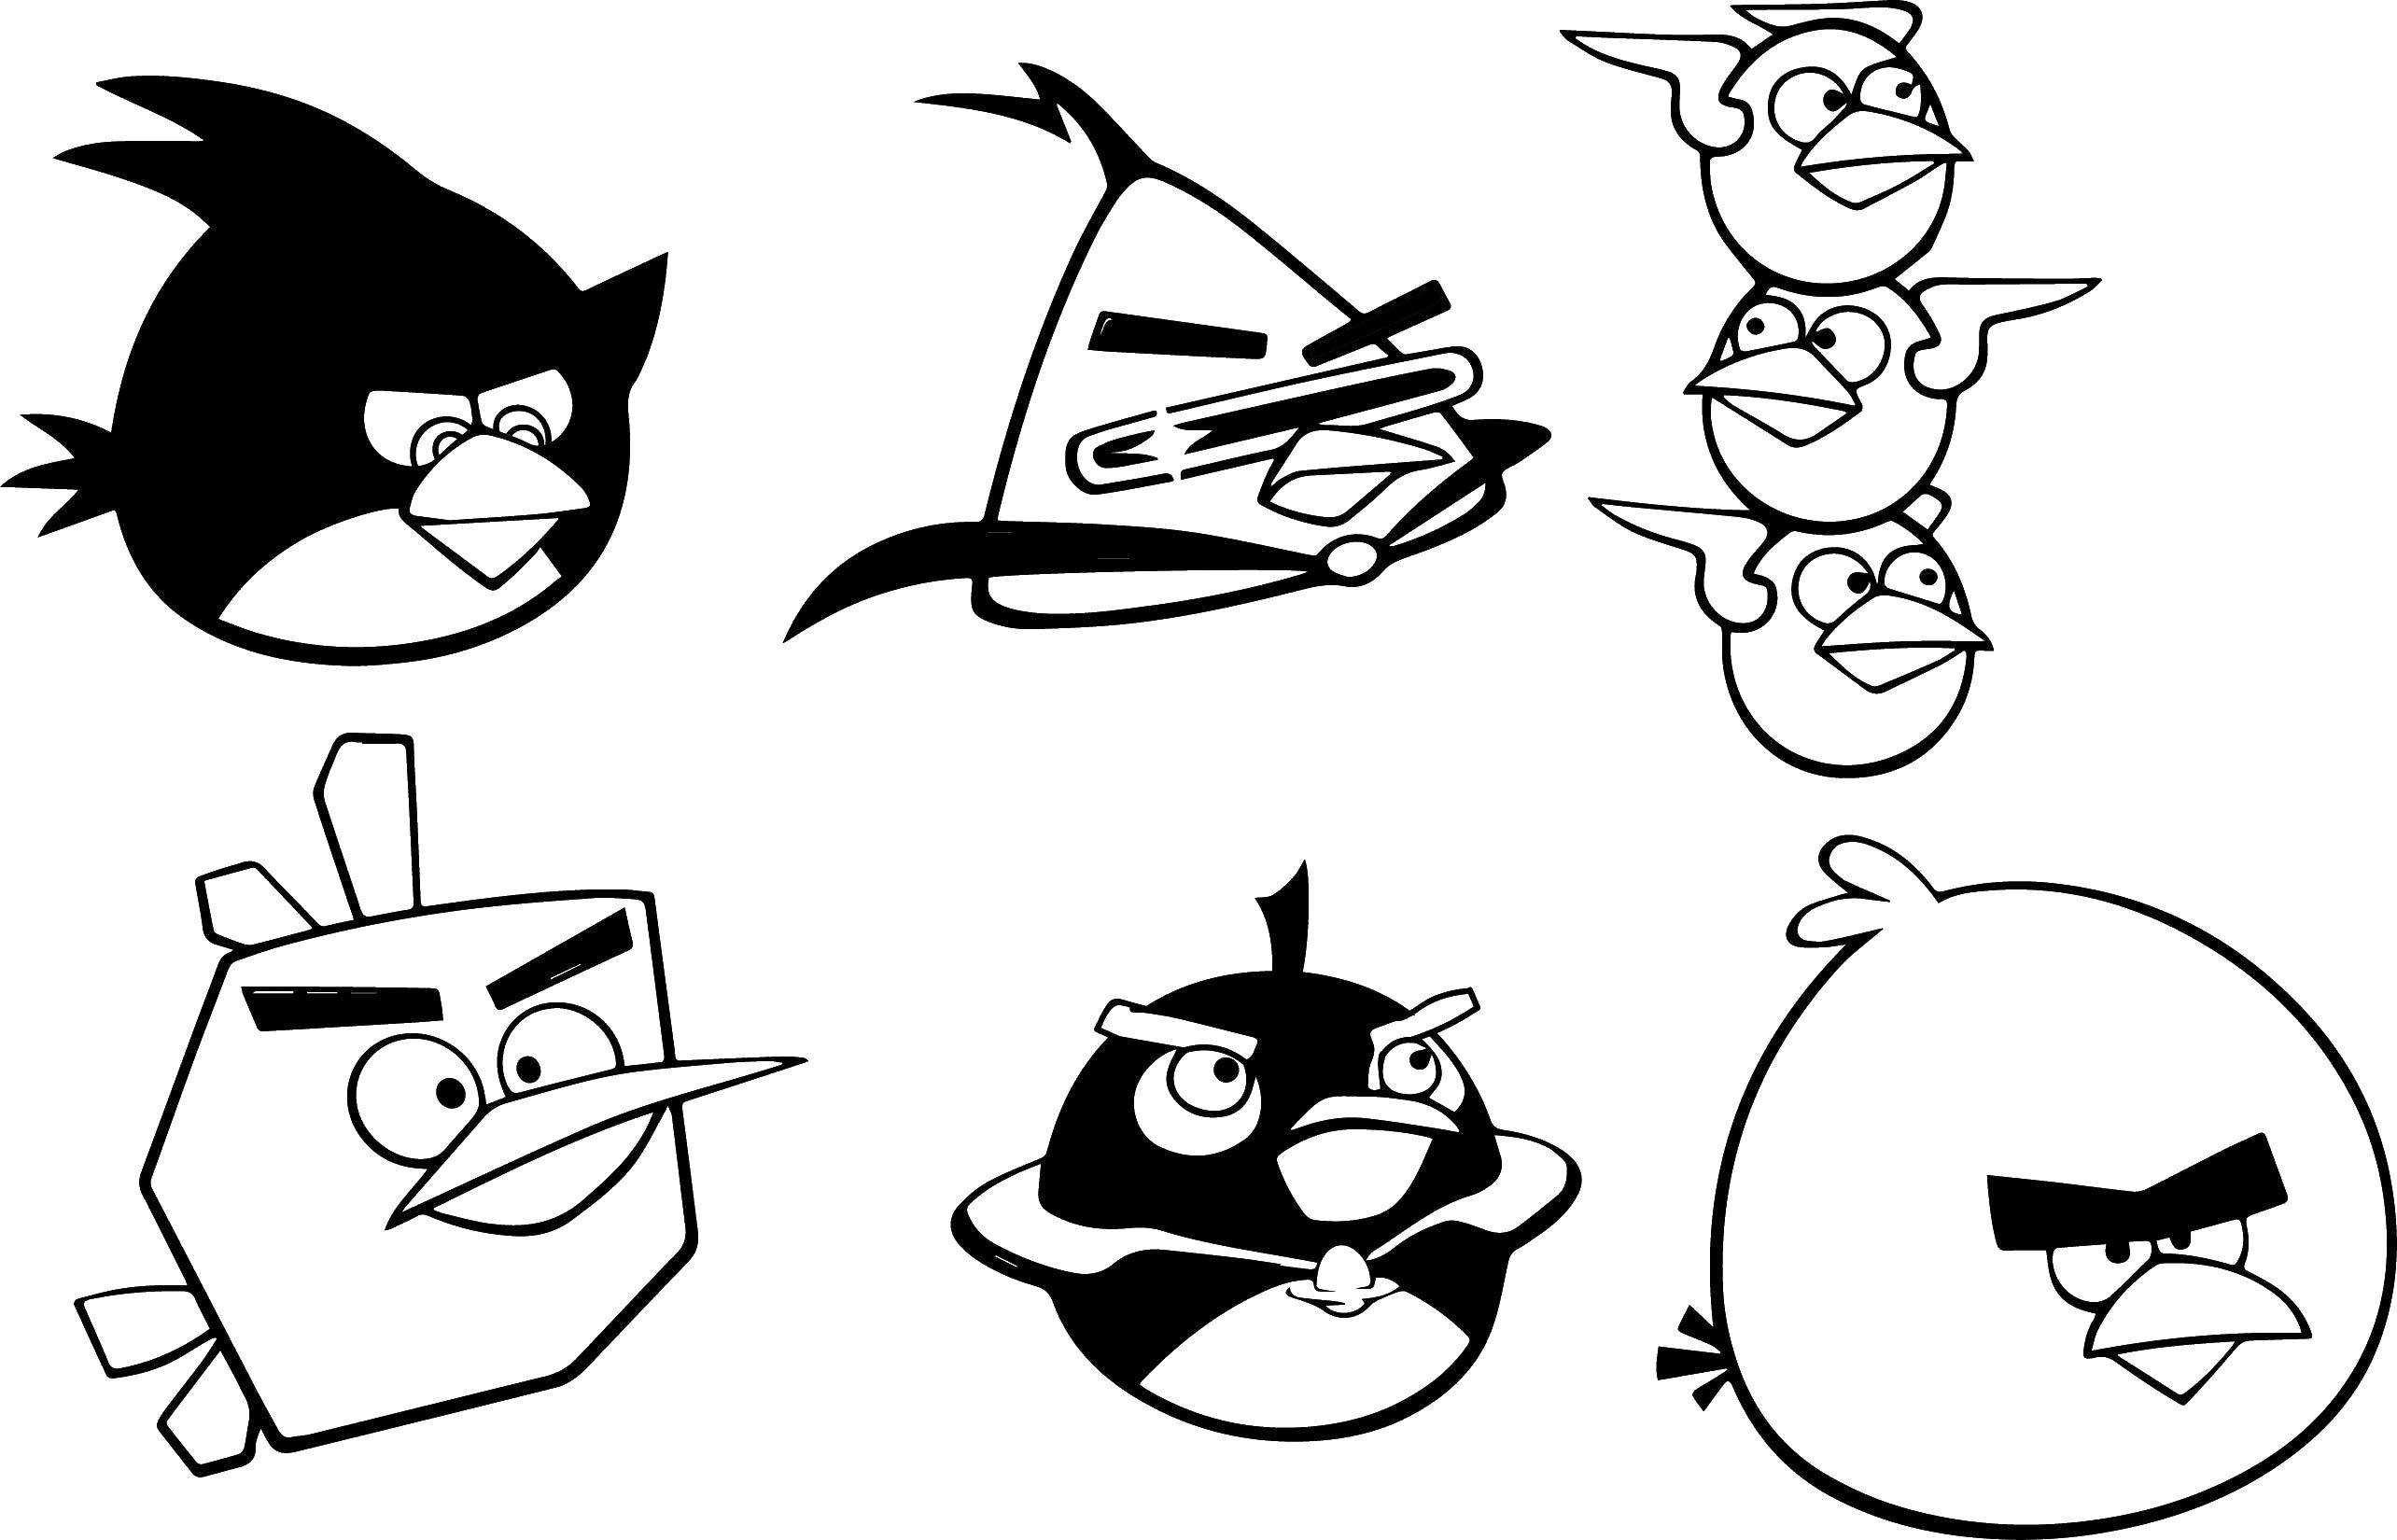 Coloring The birds from angry birds . Category angry birds. Tags:  Games, Angry Birds .